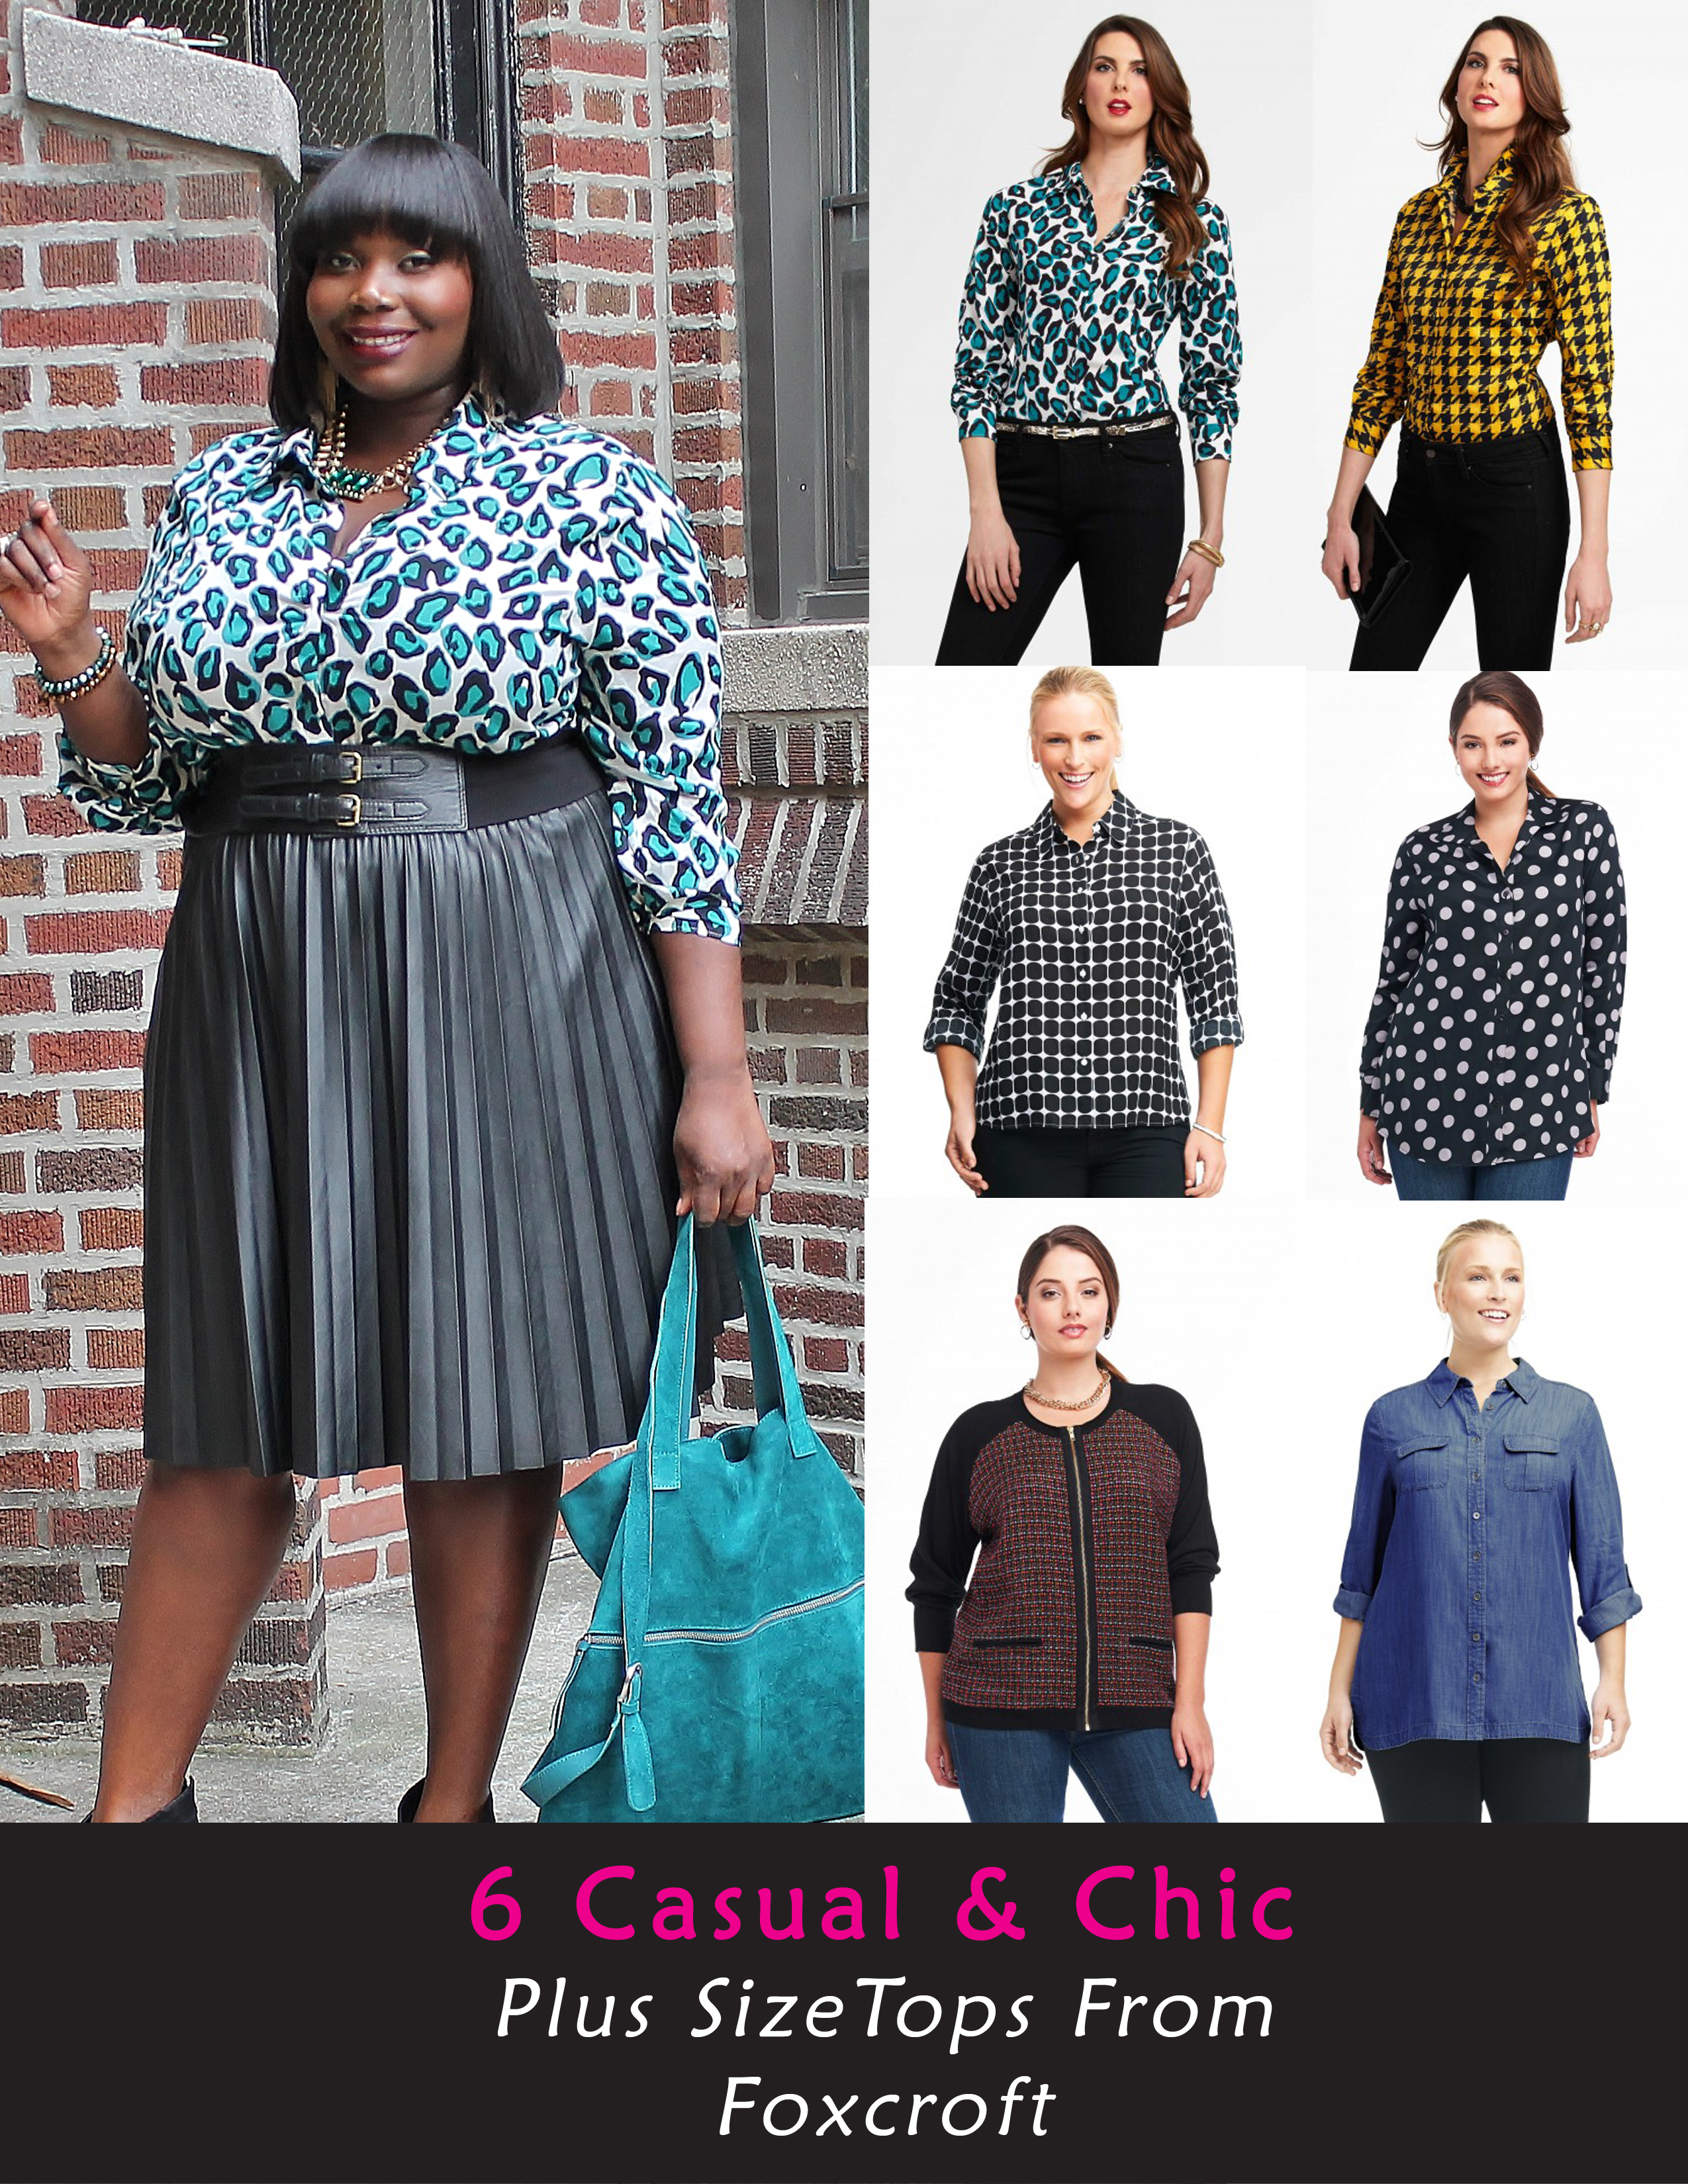 6 Casual & Chic Plus Size Tops From Foxcroft - Stylish Curves